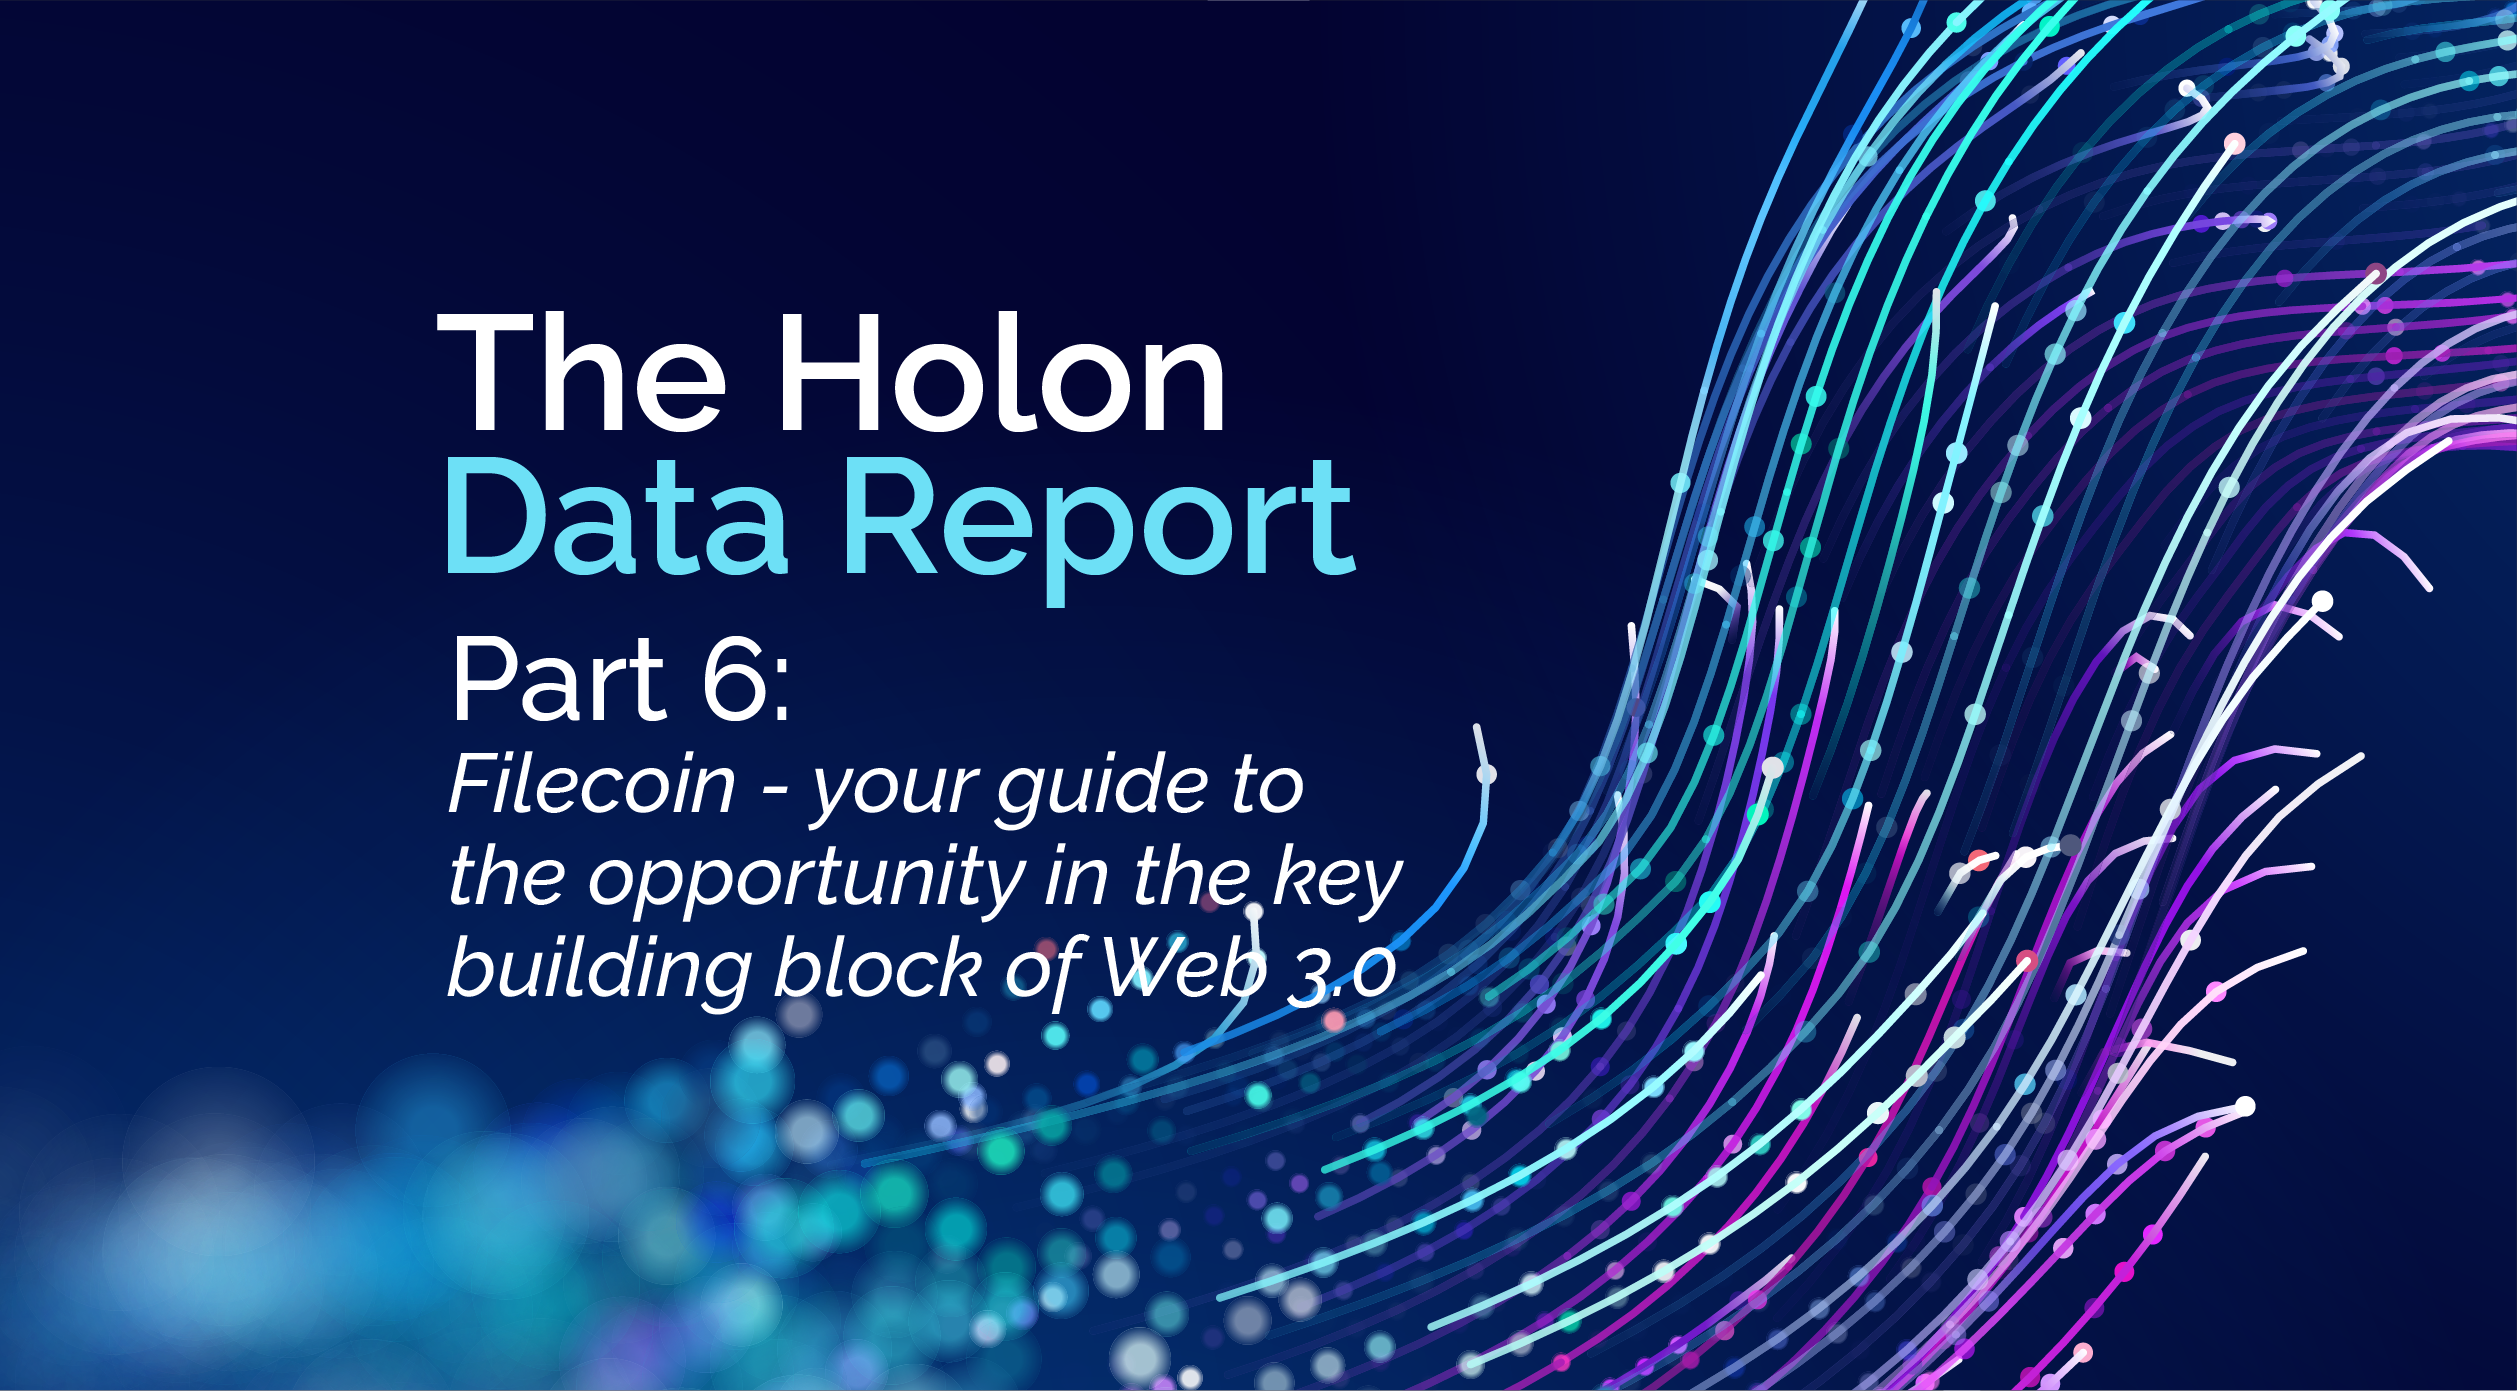 The Holon Data Report Part 6: Filecoin – your guide to the opportunity in the key building block of Web 3.0